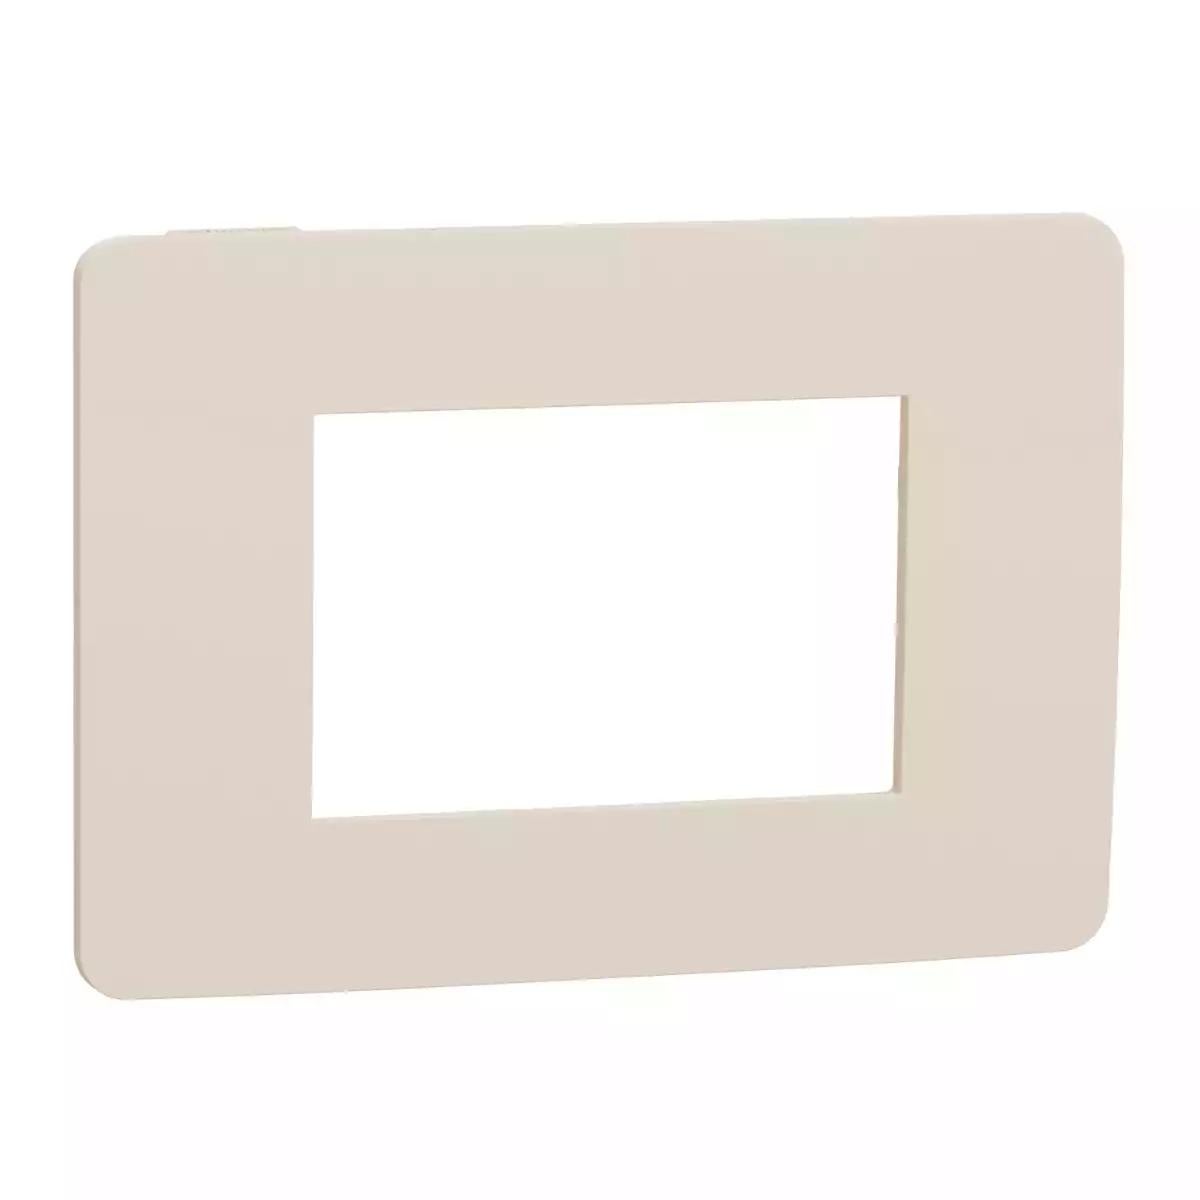 Cover frame, New Unica, 3 modules, beige or beige